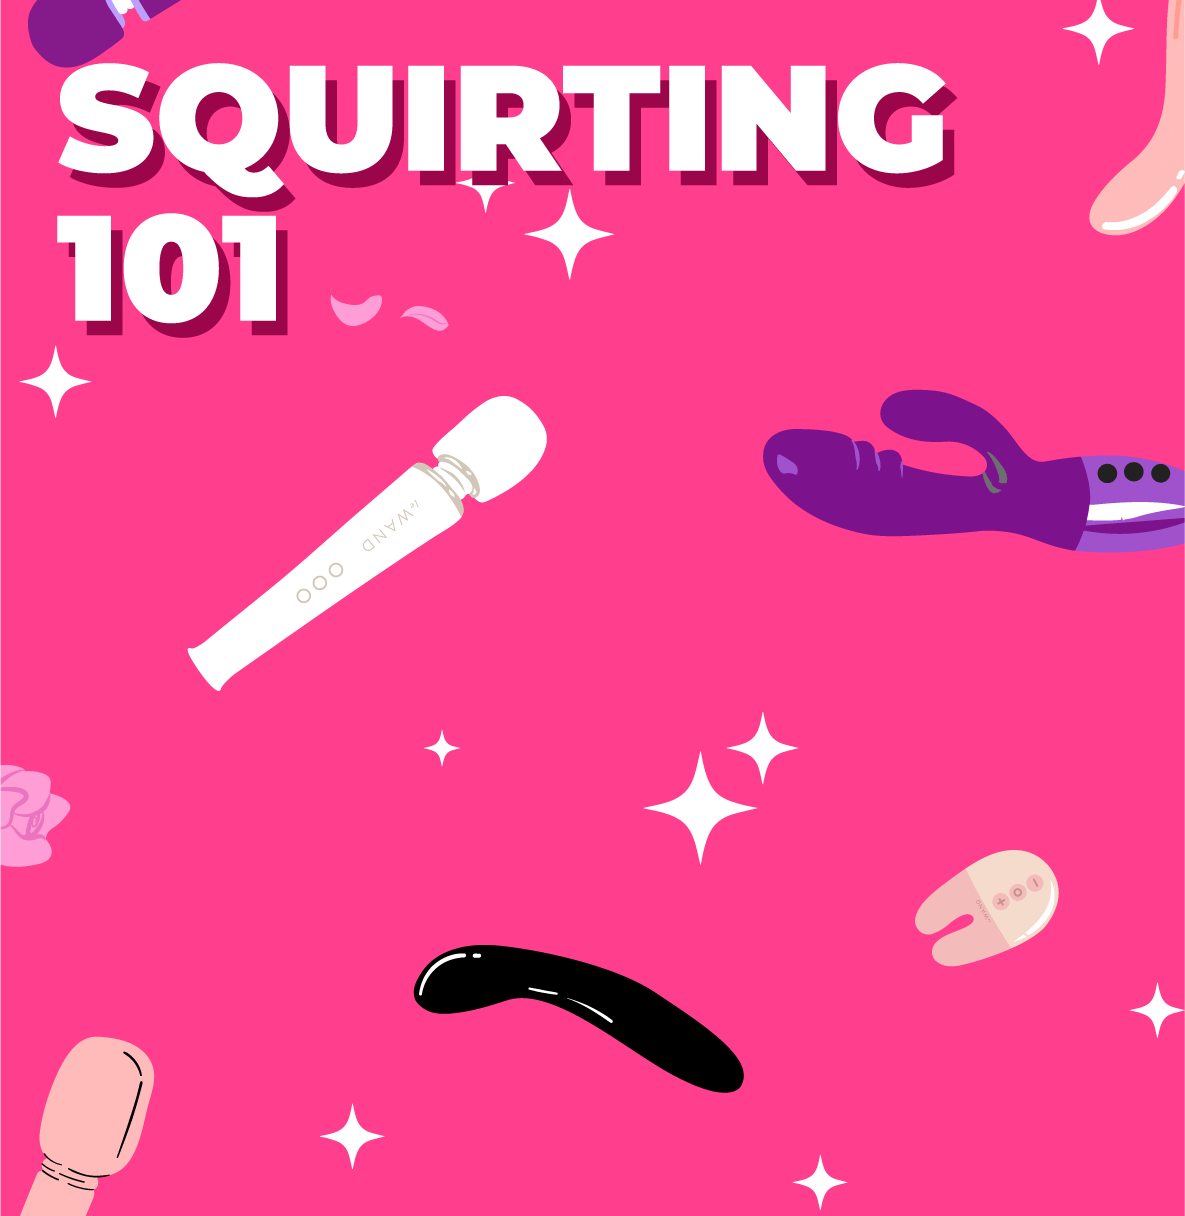 Squirting 101